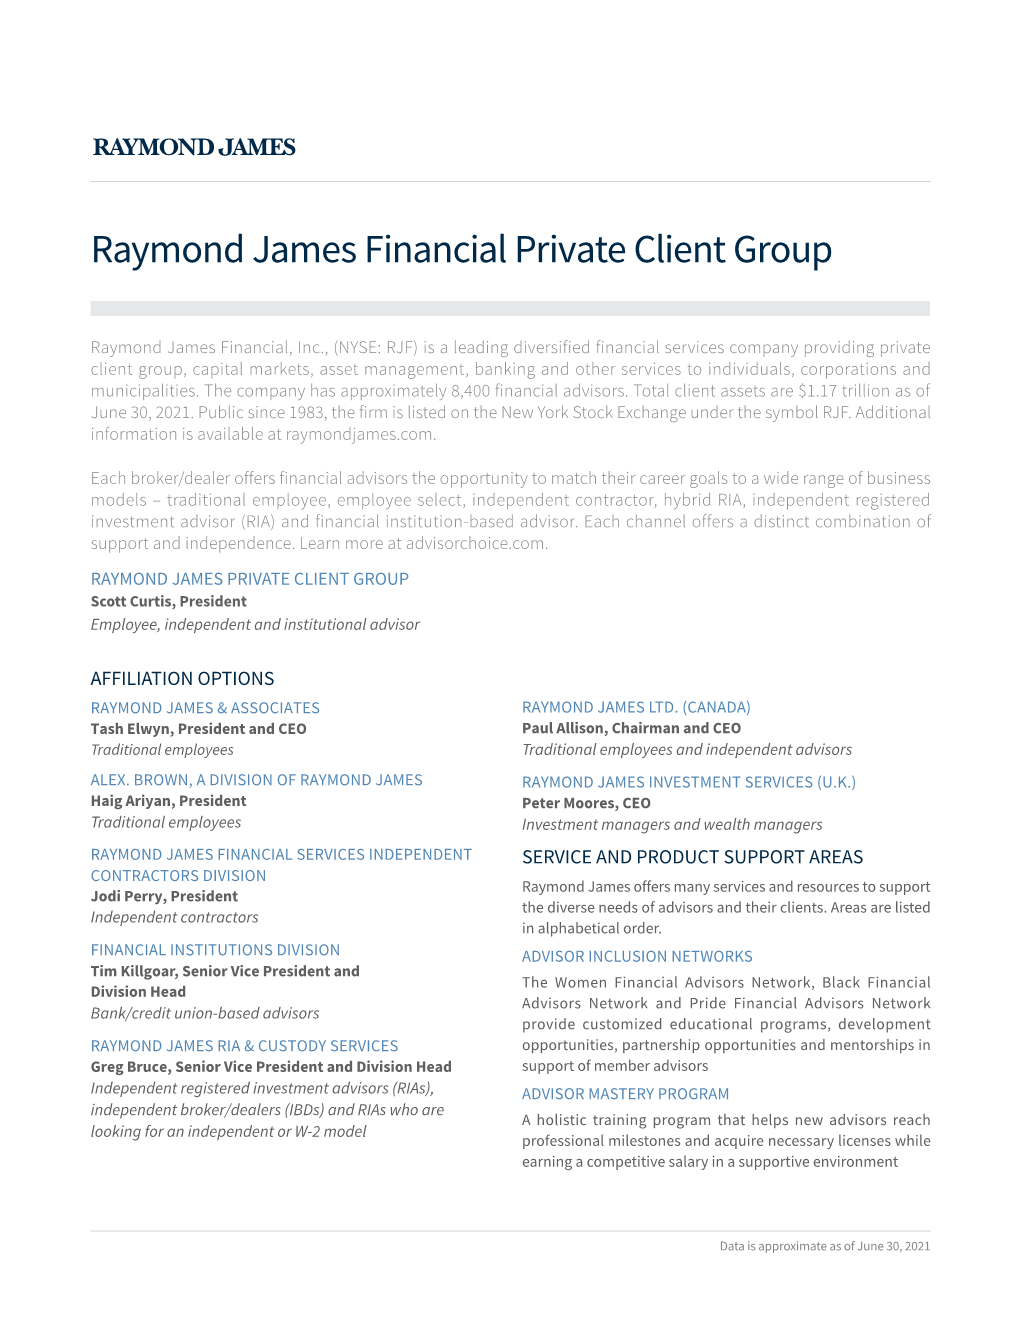 Raymond James Financial Private Client Group